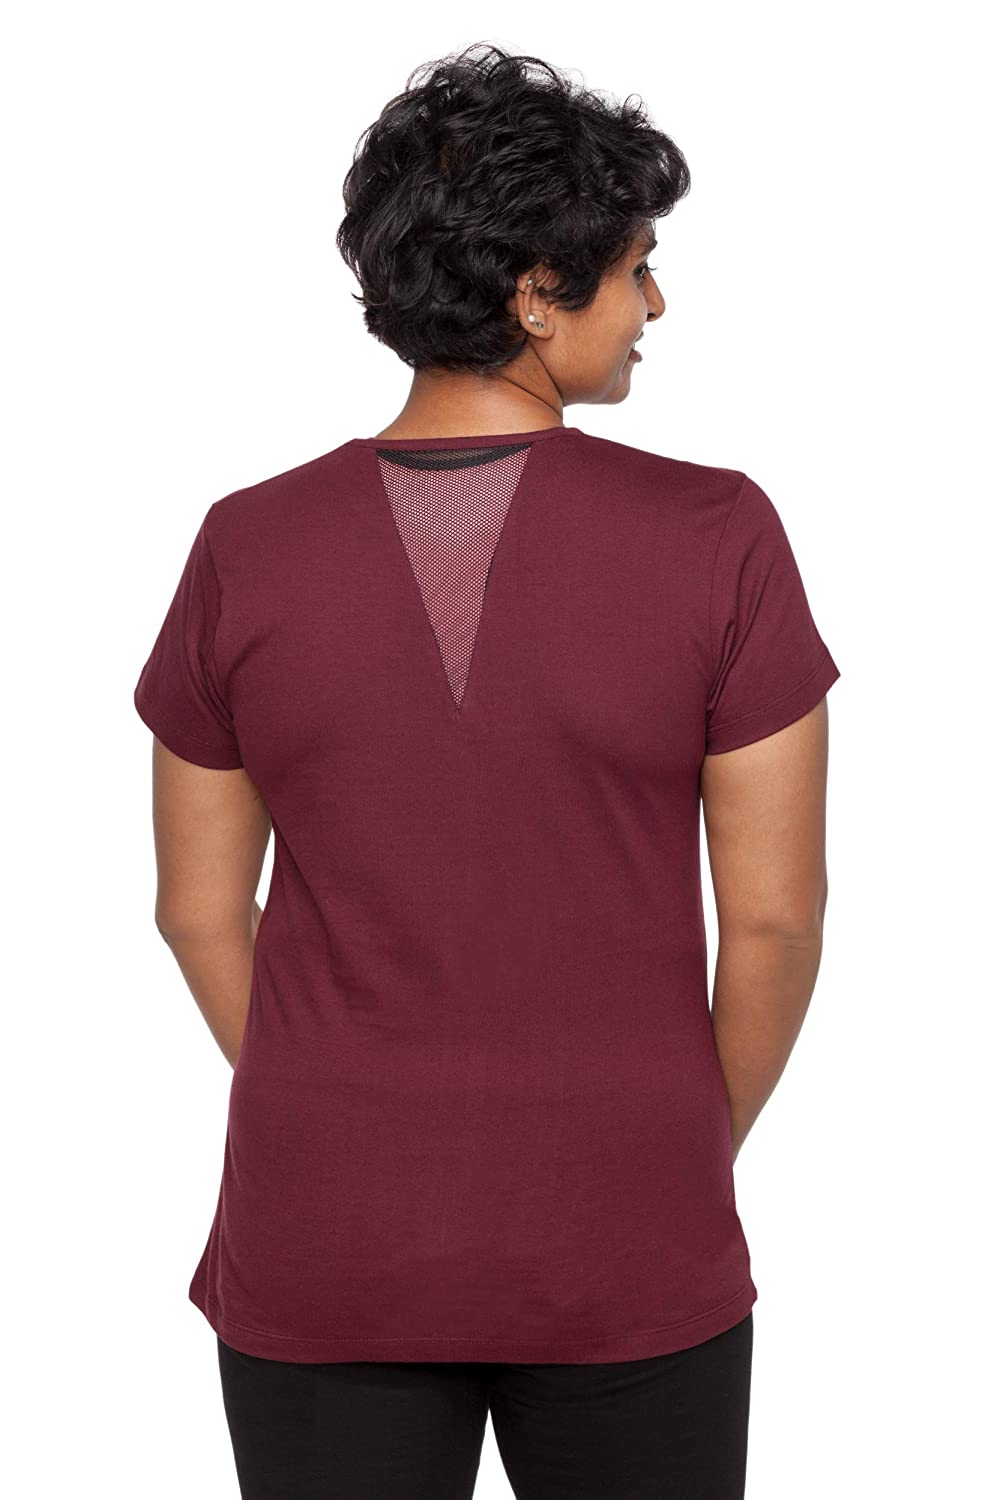 Uhane Women's Yoga and Gym Cotton Work-Out Round Neck Straight Cut Plain T- Shirt (Maroon) Short Sleeves Top for Sports and Fitness – Uhane Fitness